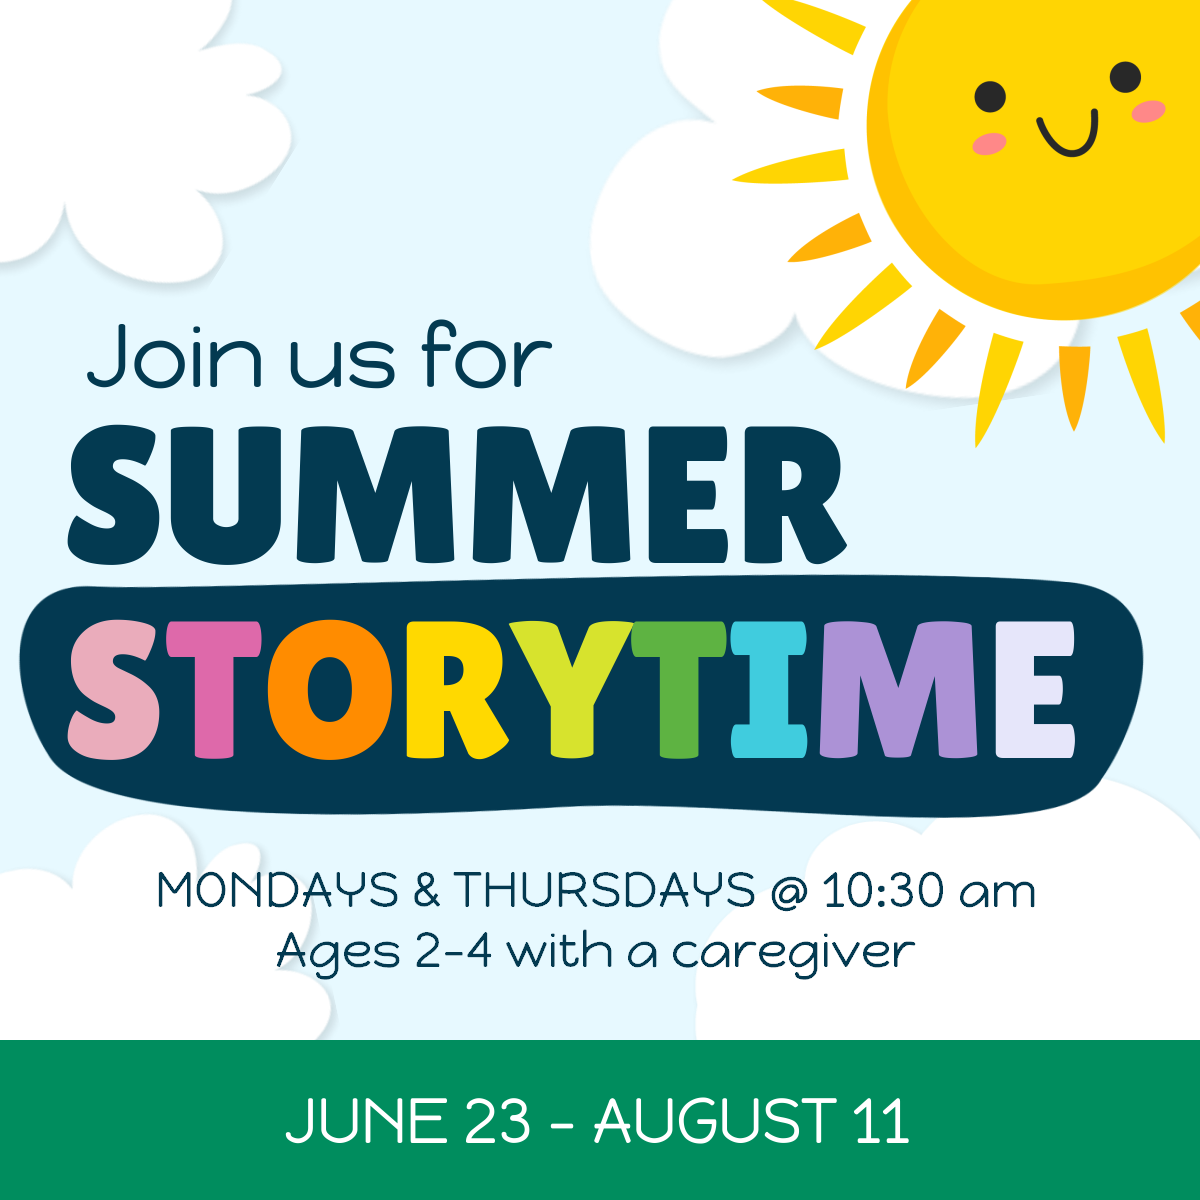 Summer Storytime Mondays and Thursdays at 10:30 am June 23 - August 11